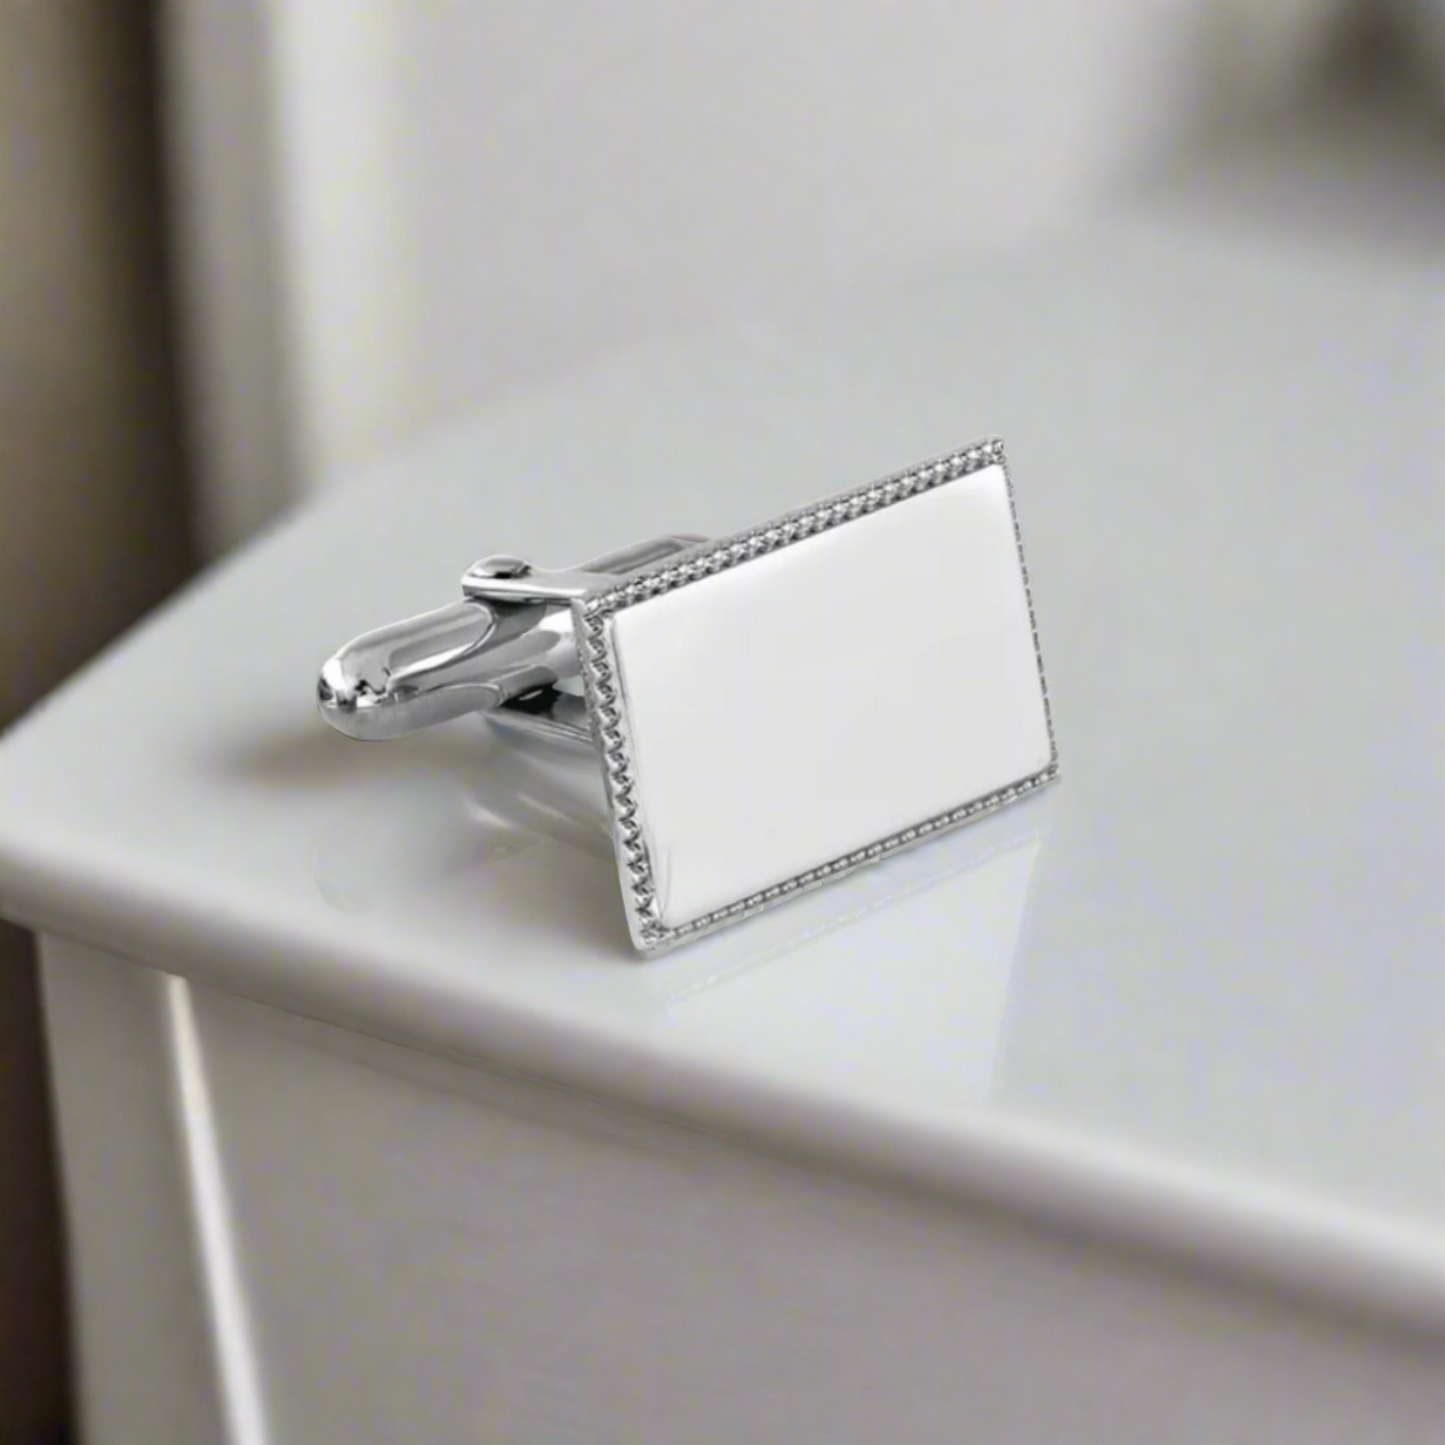 Sterling Silver Rectangular Cufflinks with Beaded Edge